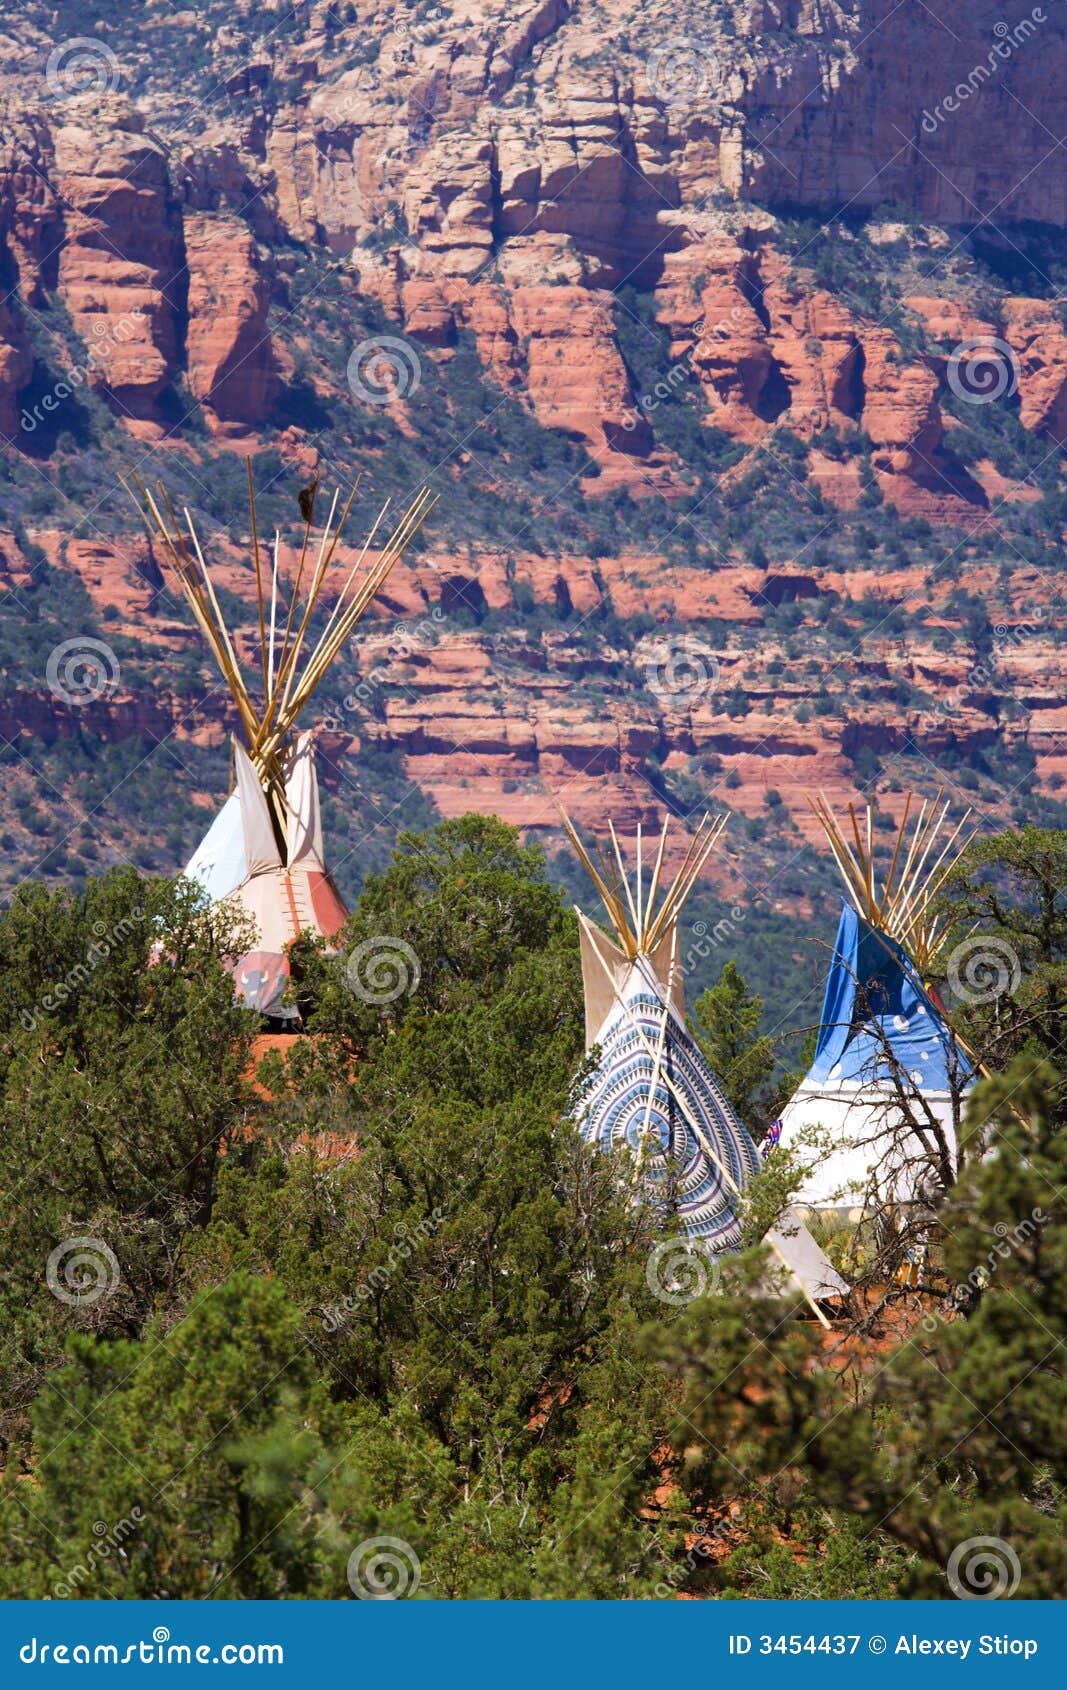 tipi and red rocks